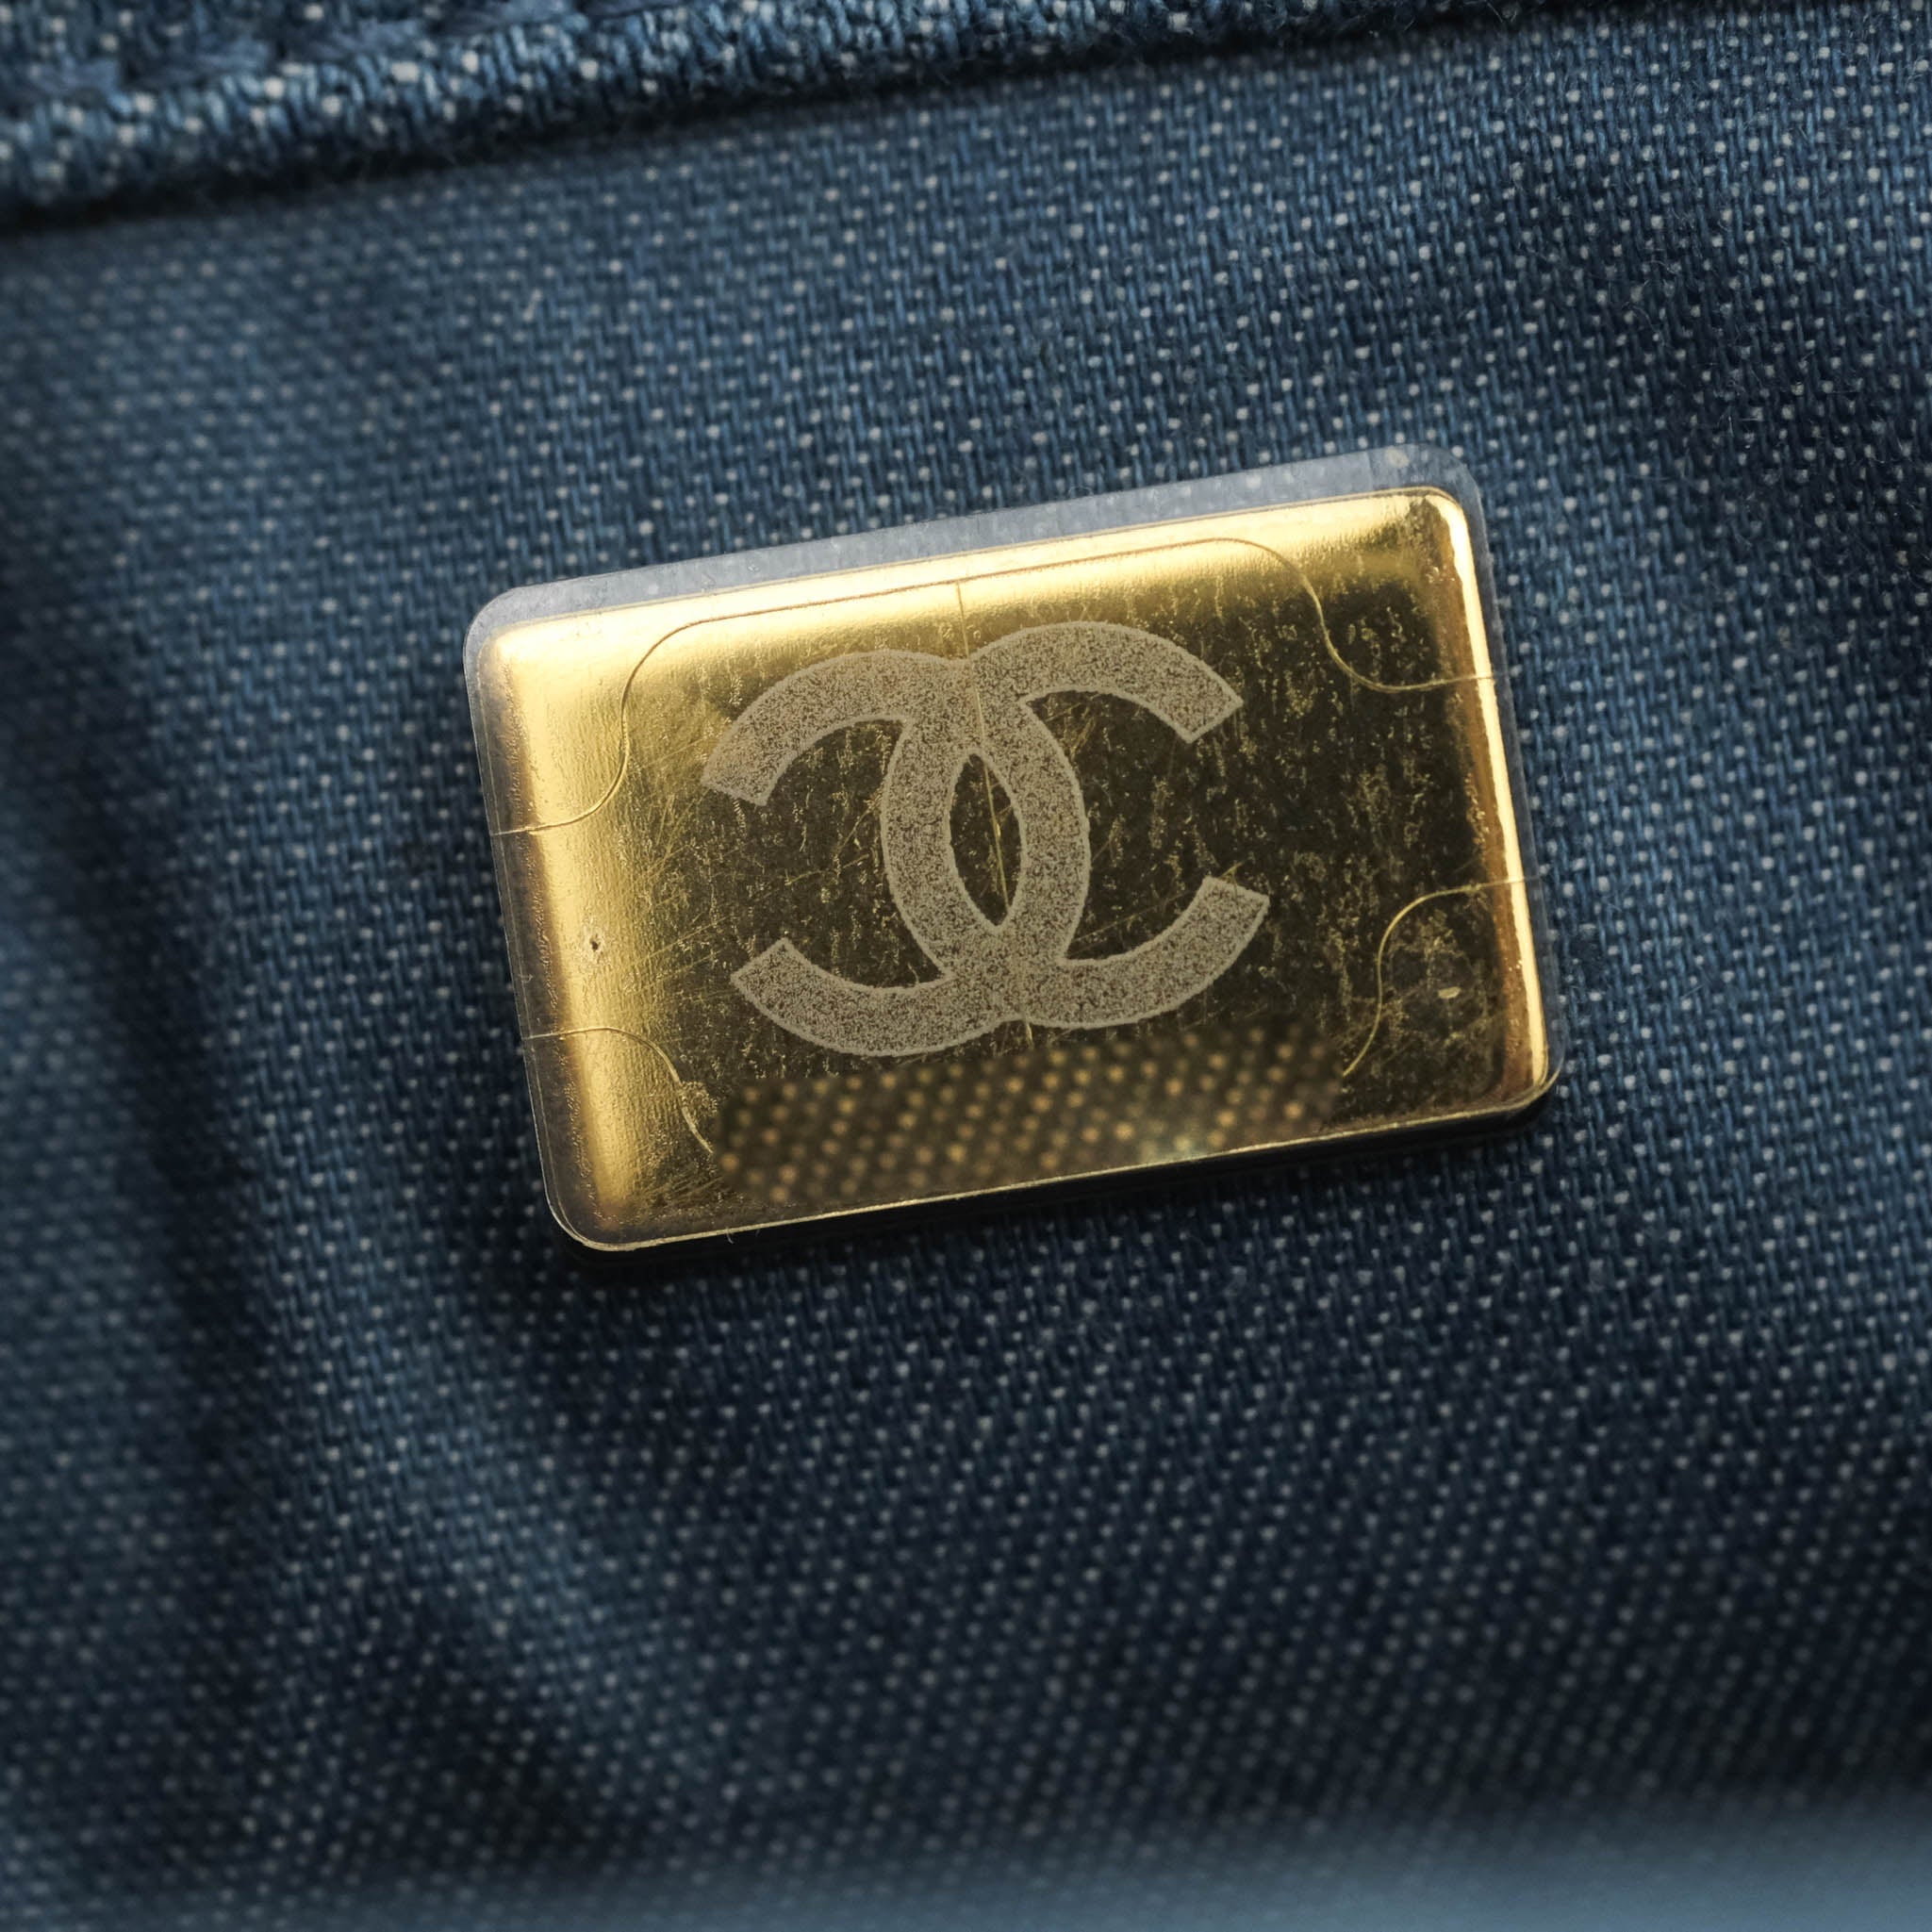 Chanel Mini Rectangular Pearl Crush Quilted Denim Aged Gold Hardware 2 –  Coco Approved Studio